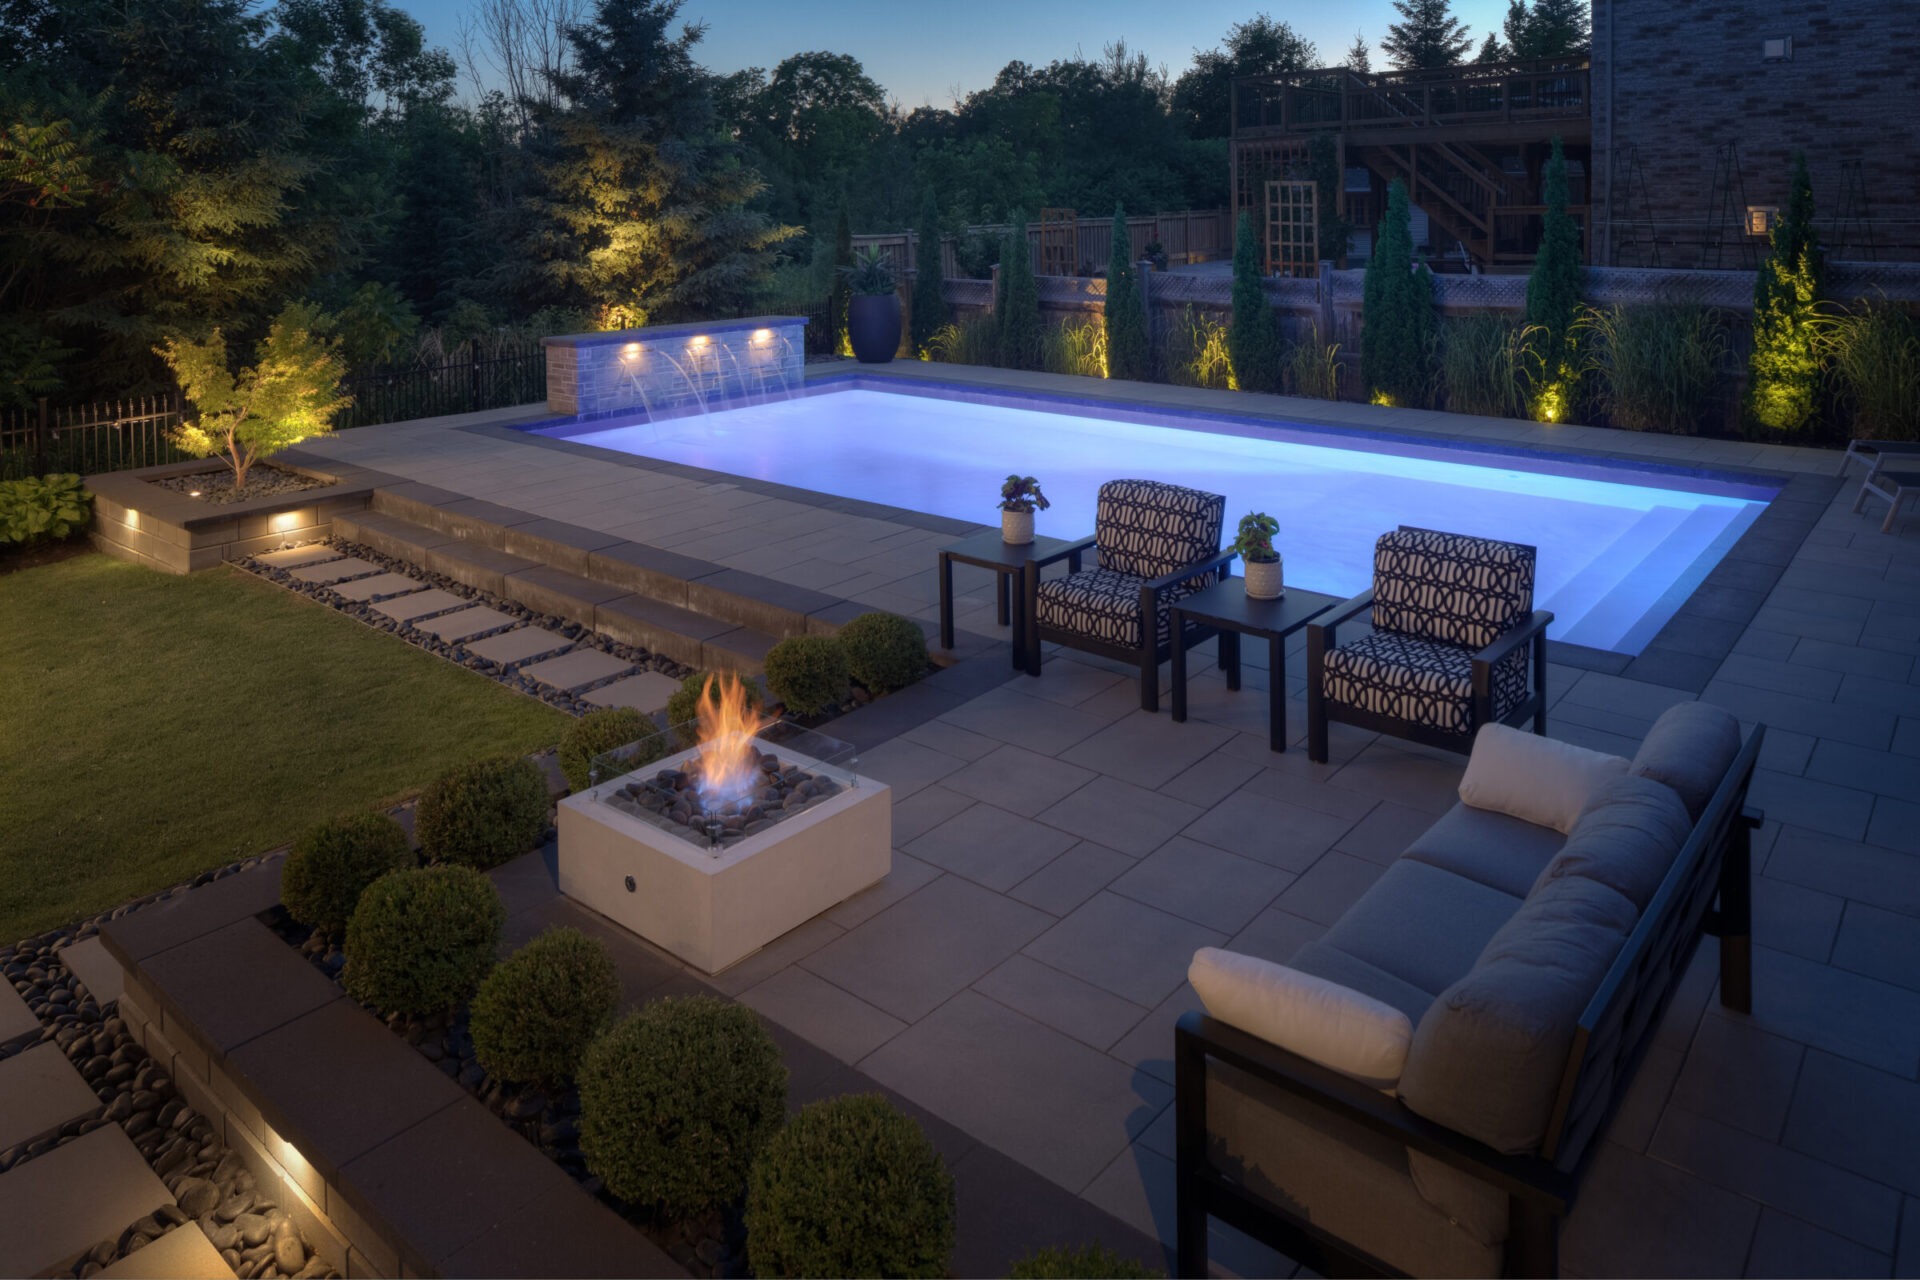 An elegant outdoor setting at dusk featuring a serene swimming pool, comfortable patio furniture, a fire feature, manicured lawn, and ambient lighting.